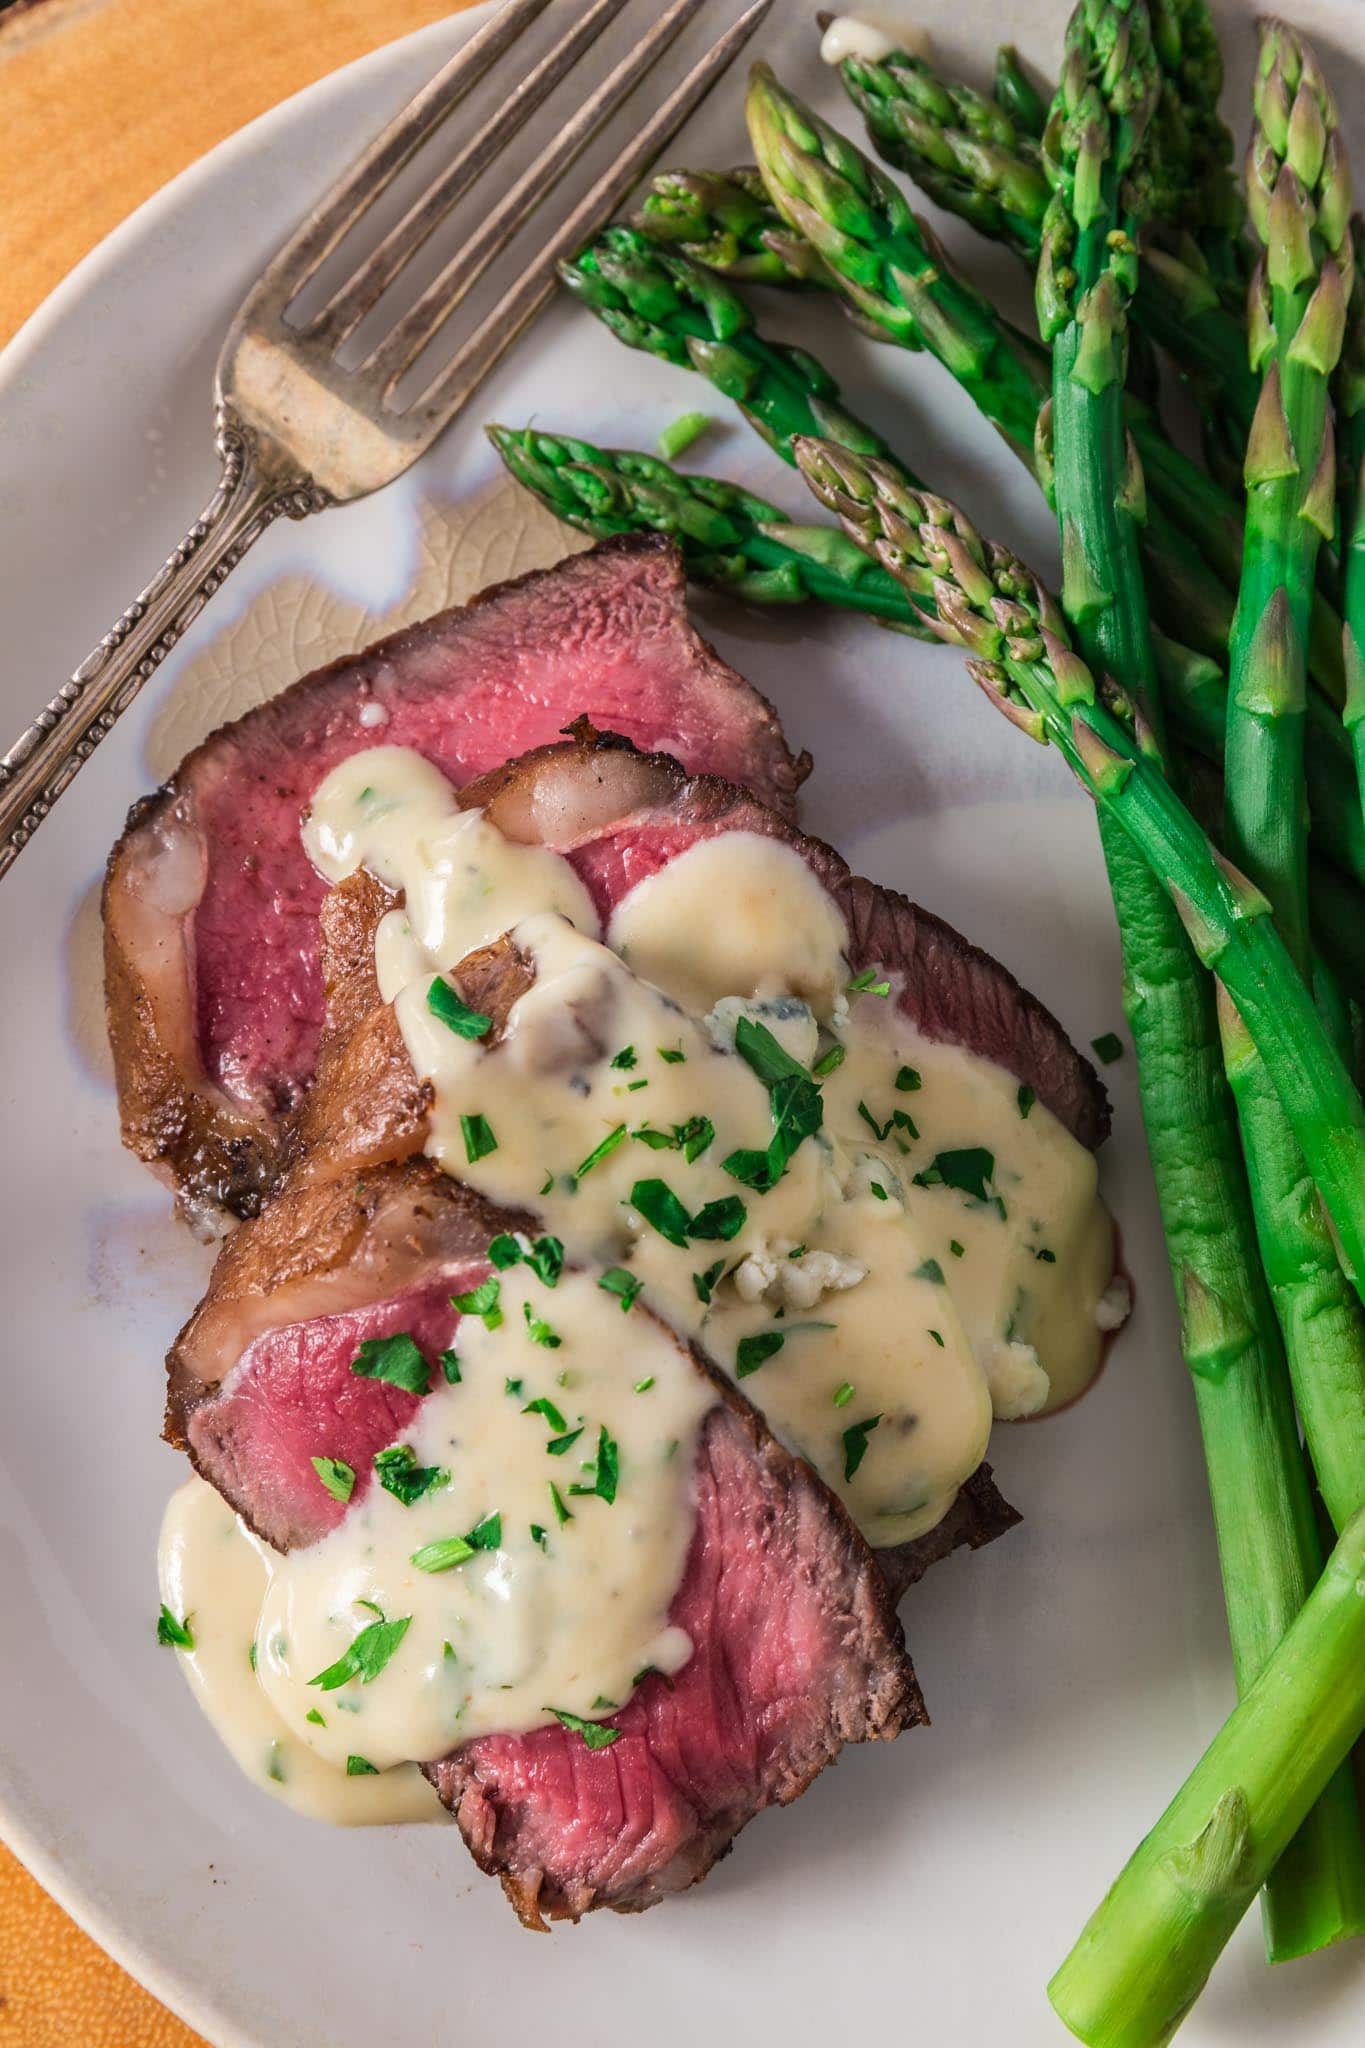 Pan Seared New York Strip Steak with Gorgonzola Sauce | www.oliviascuisine.com | No need to go to a steakhouse to enjoy a juicy New York Strip Steak, cooked to perfection. Follow my tips and you can make a superb steak dinner right at home, on your stove, in less than 30 minutes! The buttery Gorgonzola Cream Sauce is optional, but you'd be crazy to skip it. (Recipe and food photography by @oliviascuisine.)